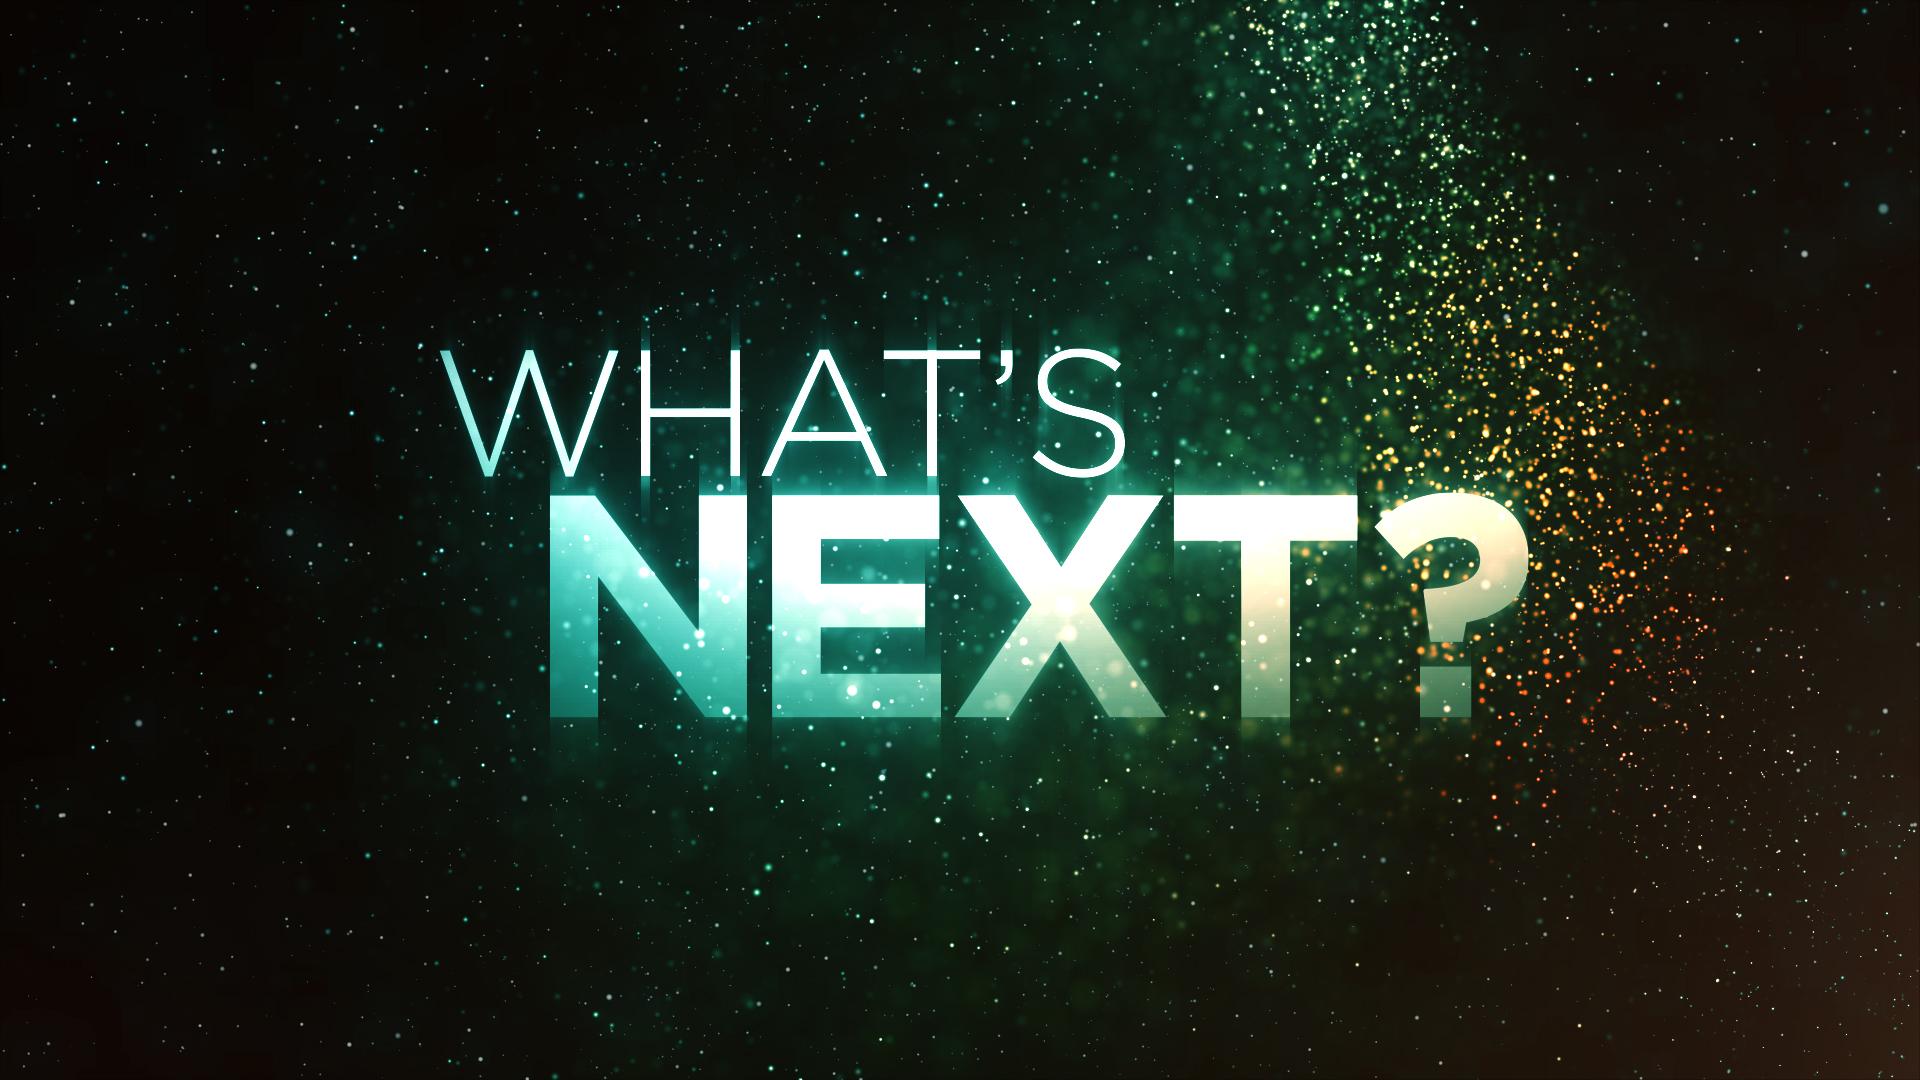 Next картинки. What next. What's next. Next Step. Be what's next.